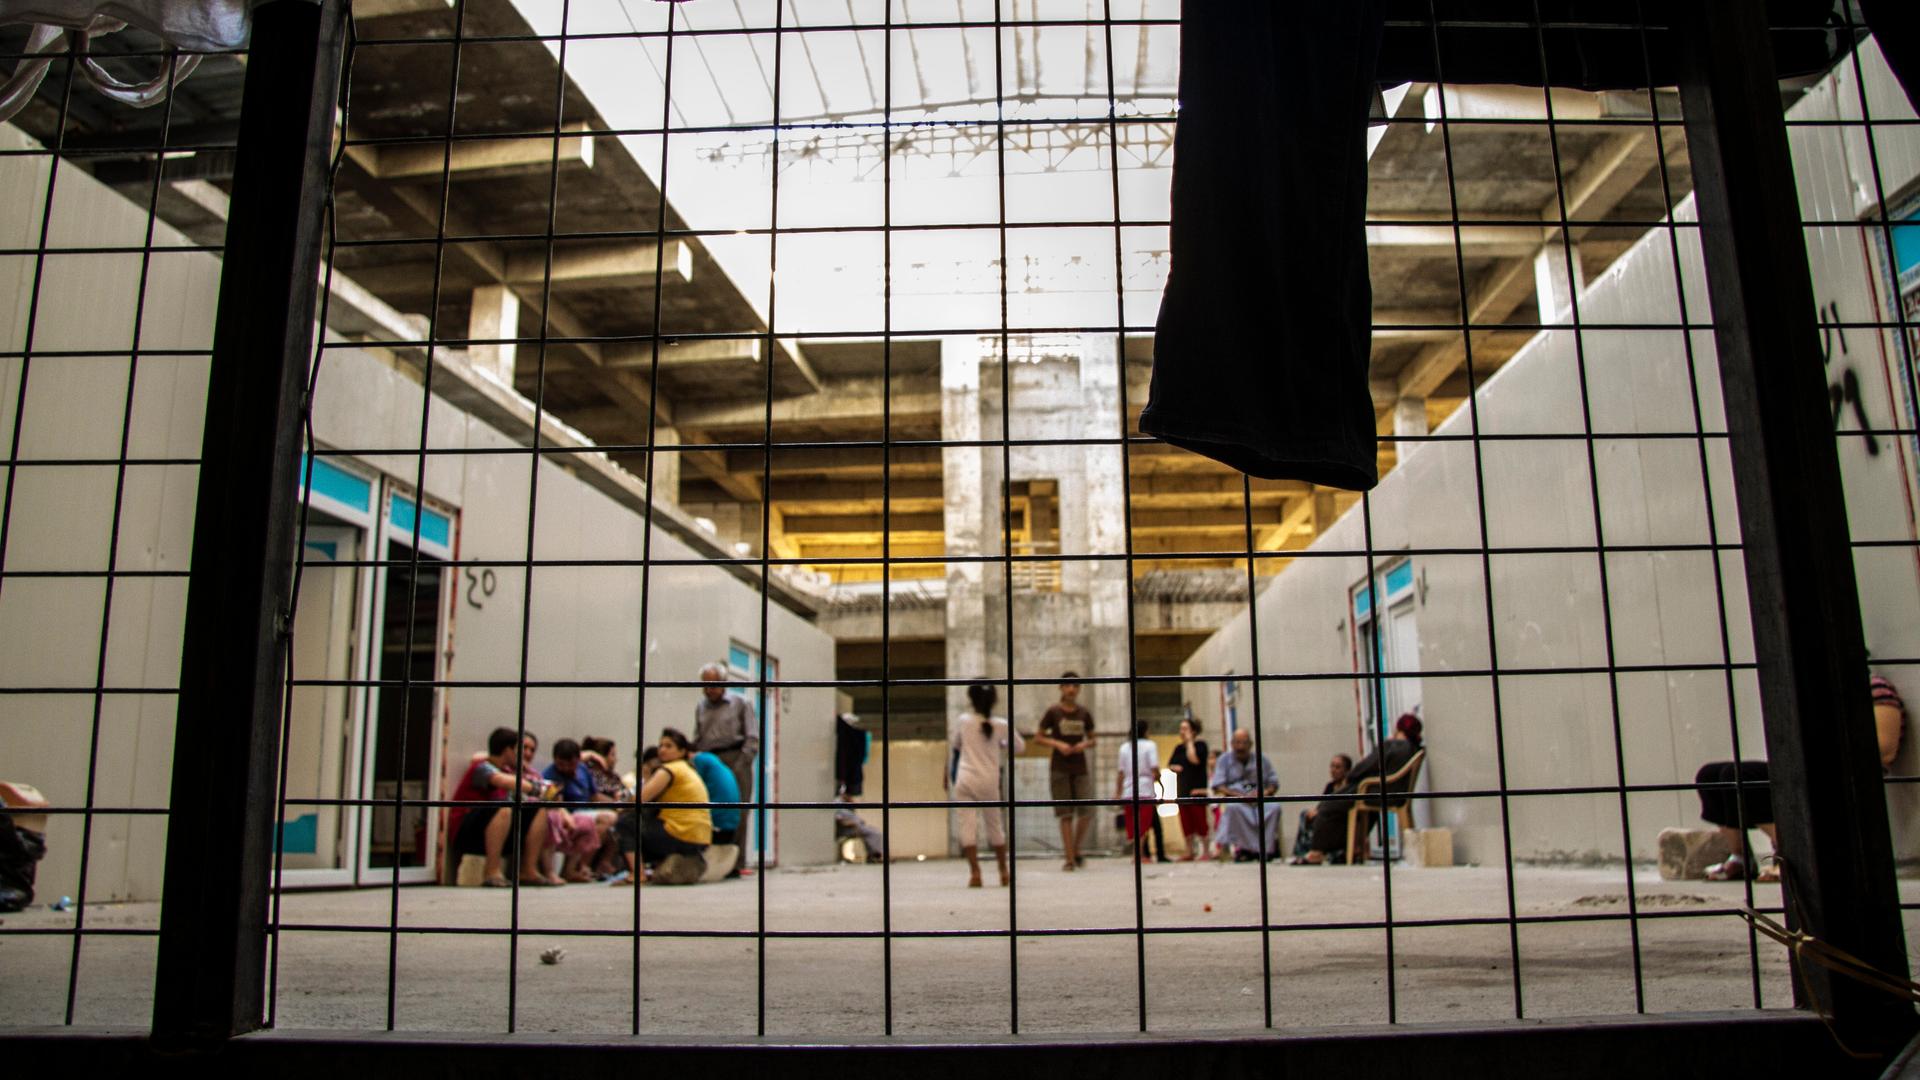 The main atrium of this would-be mall is now home to hundreds of Iraqis from villages outside Mosul. Here the concrete floors and walls give families more protection than the displaced families living in tents in a public park just across the street. 